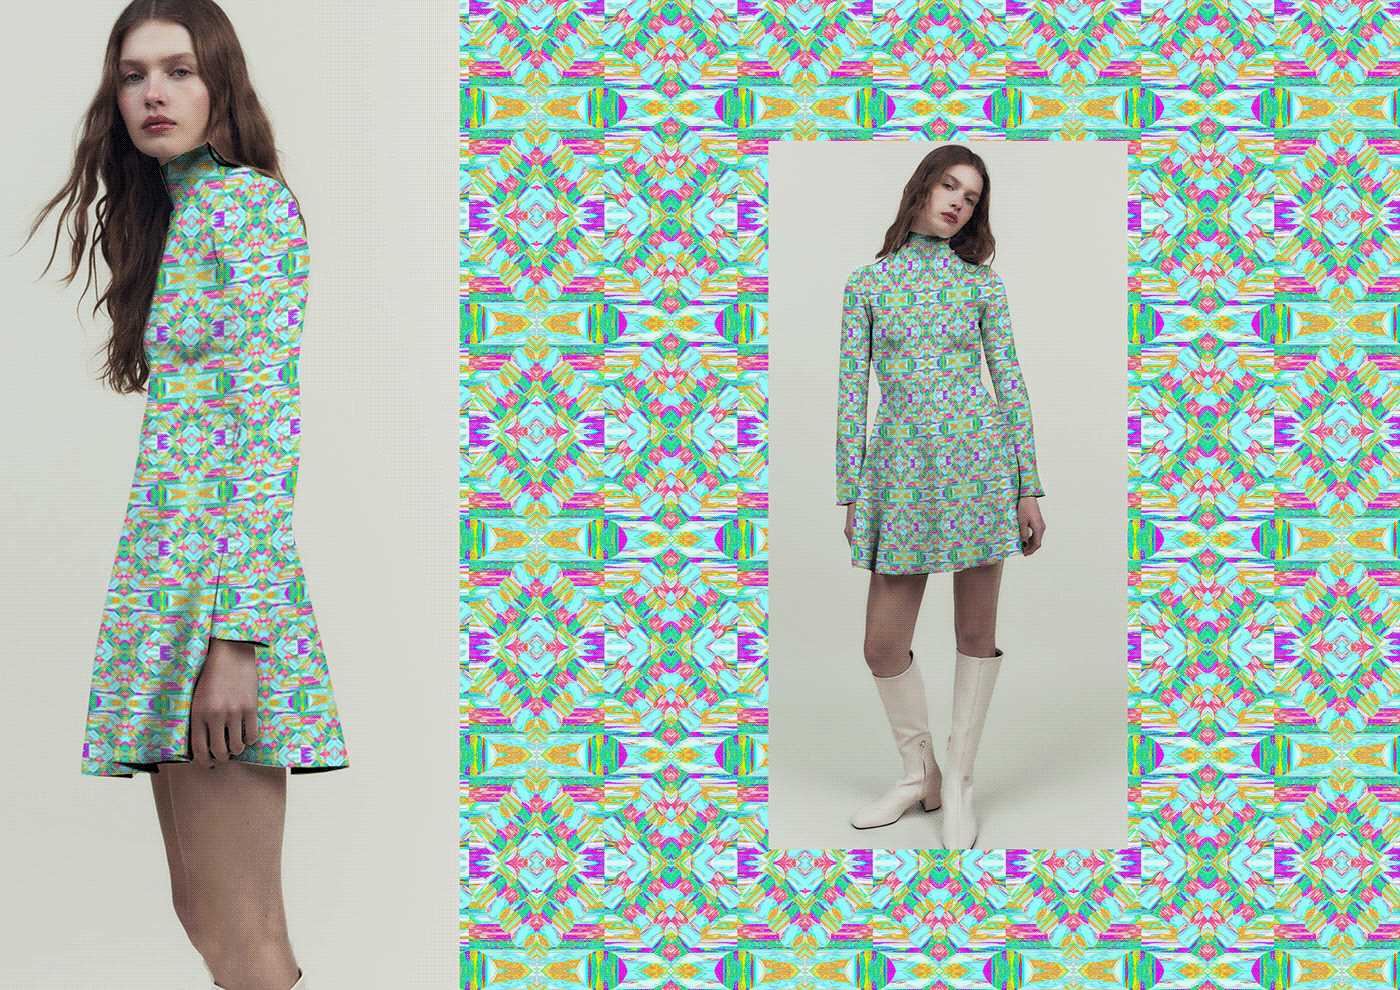 textile adobephotoshop geometric pattern trippy abstract colorful pattern designer